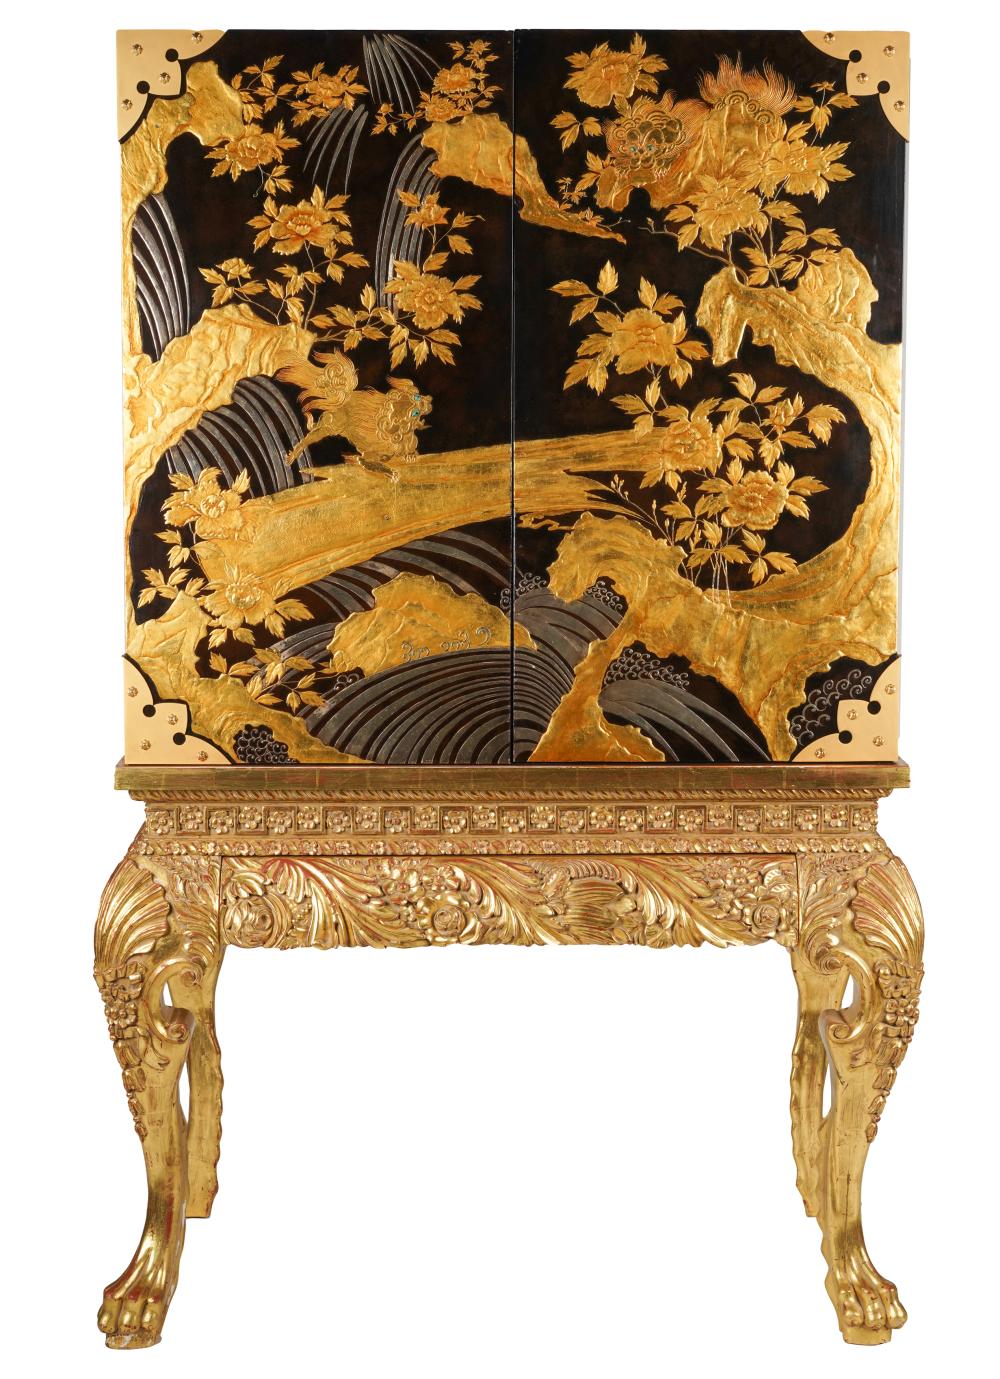 GEORGIAN-STYLE CHINOISERIE CABINET ON